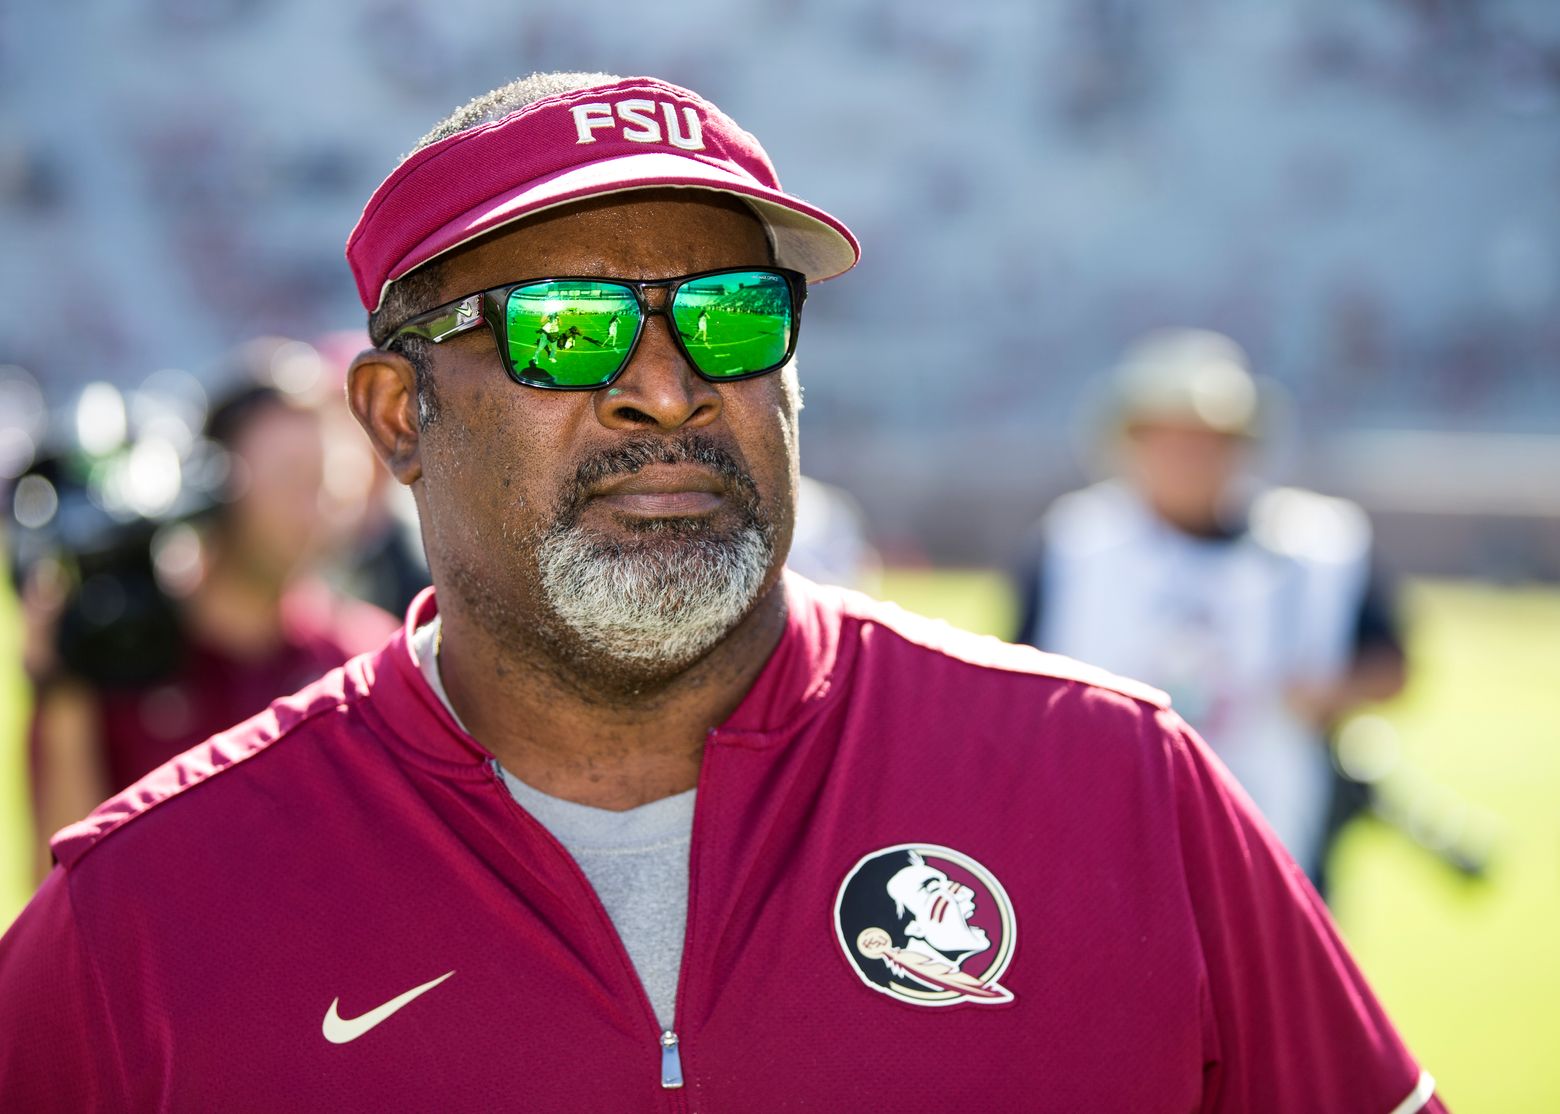 Florida State moving quickly to find new football coach | The Seattle Times